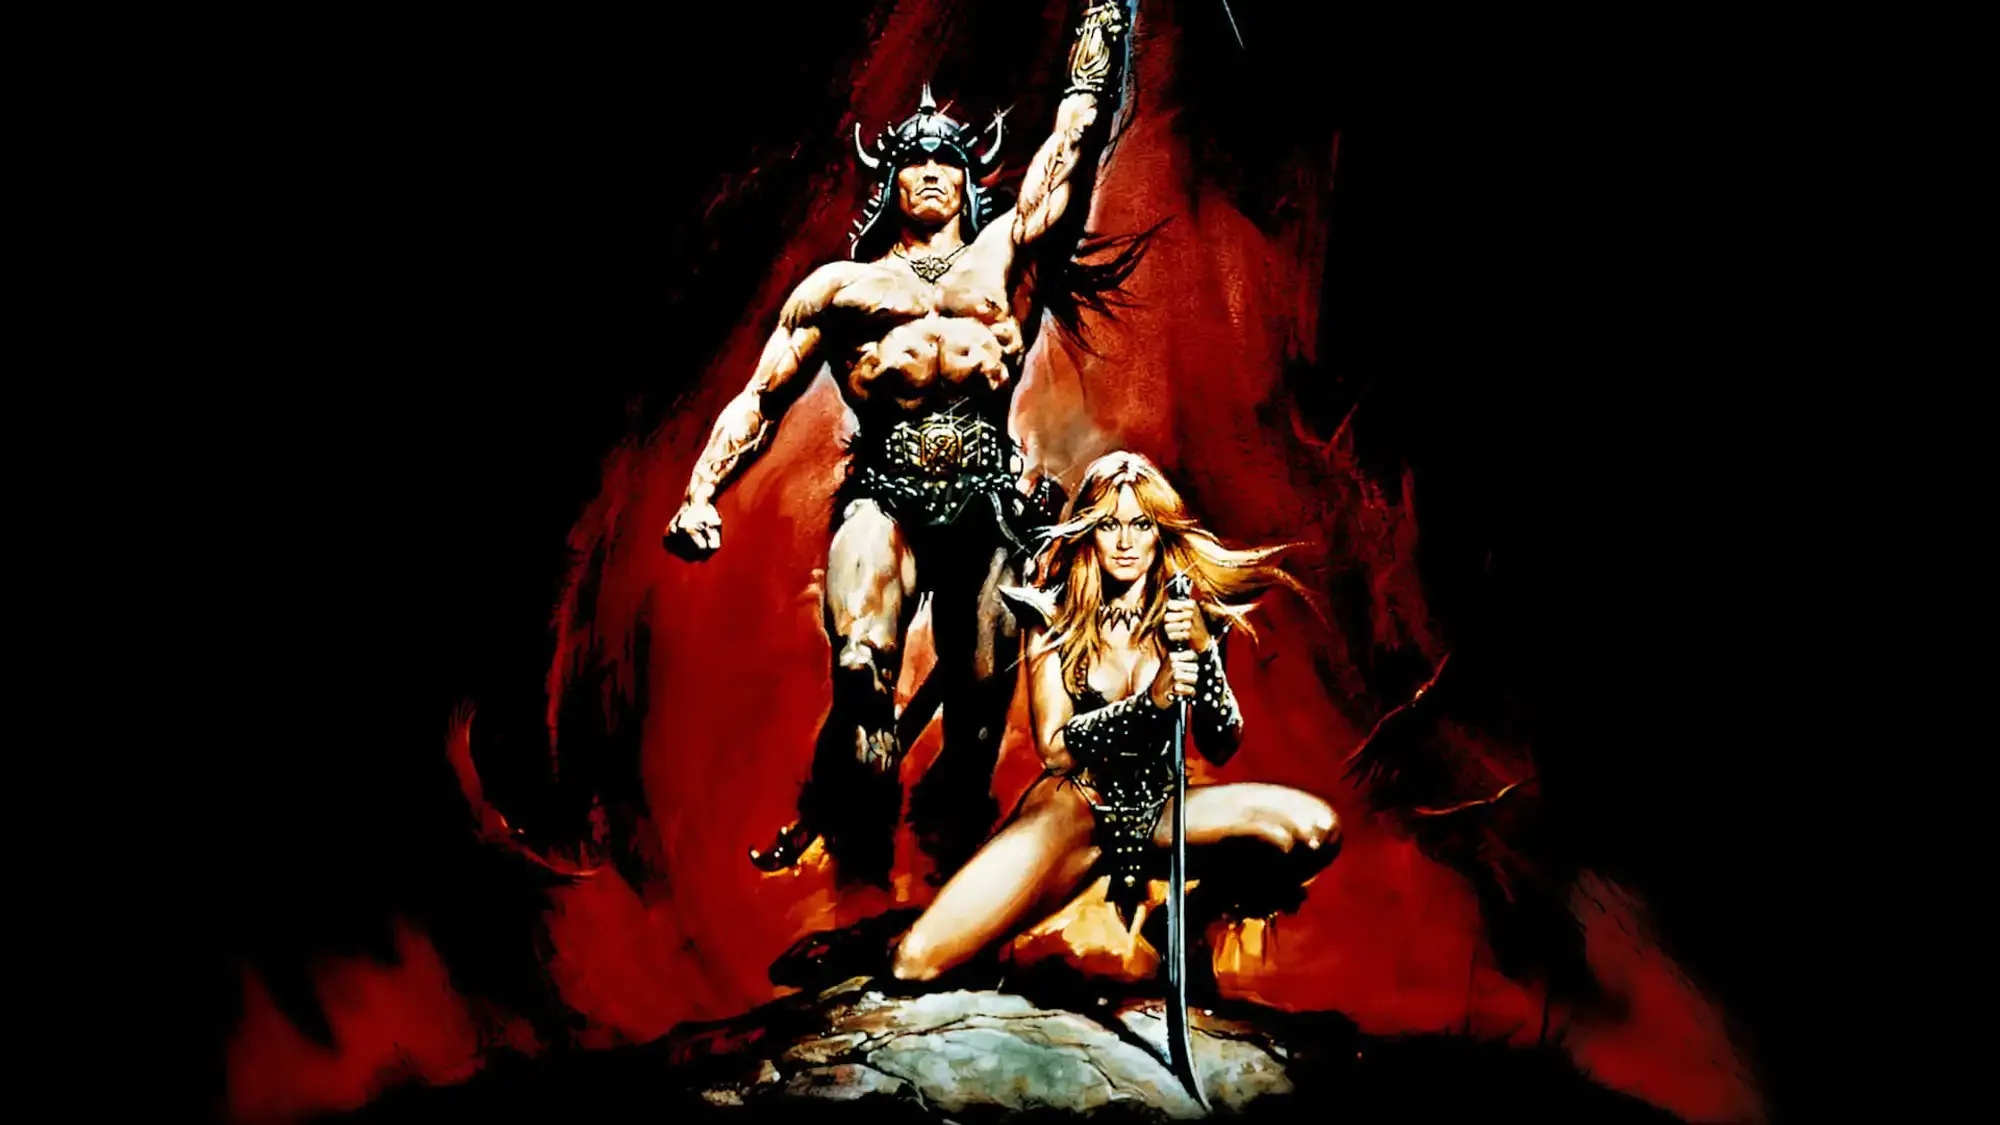 Conan the Barbarian movie review